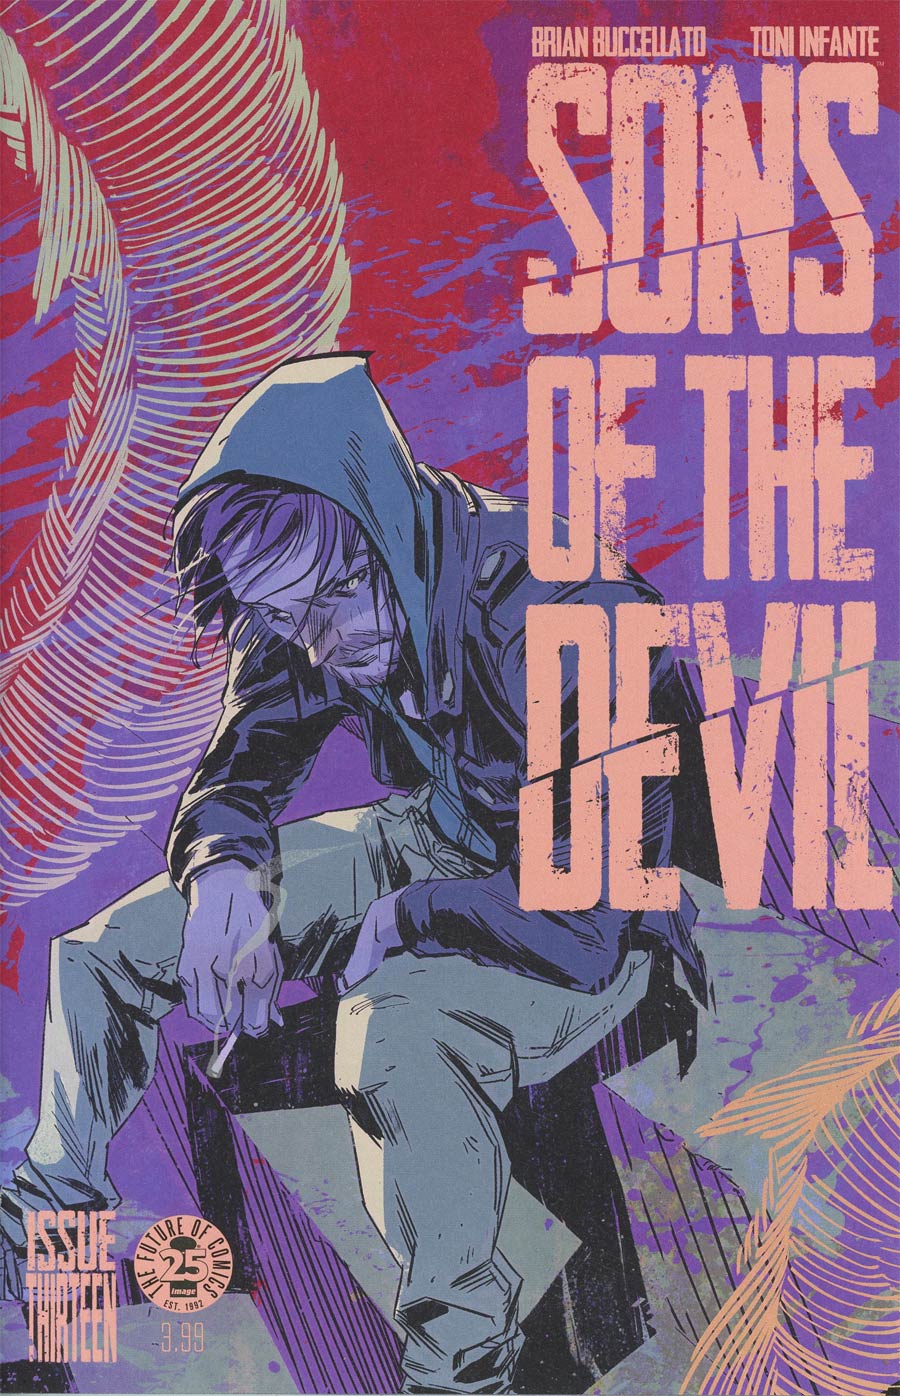 Sons Of The Devil #13